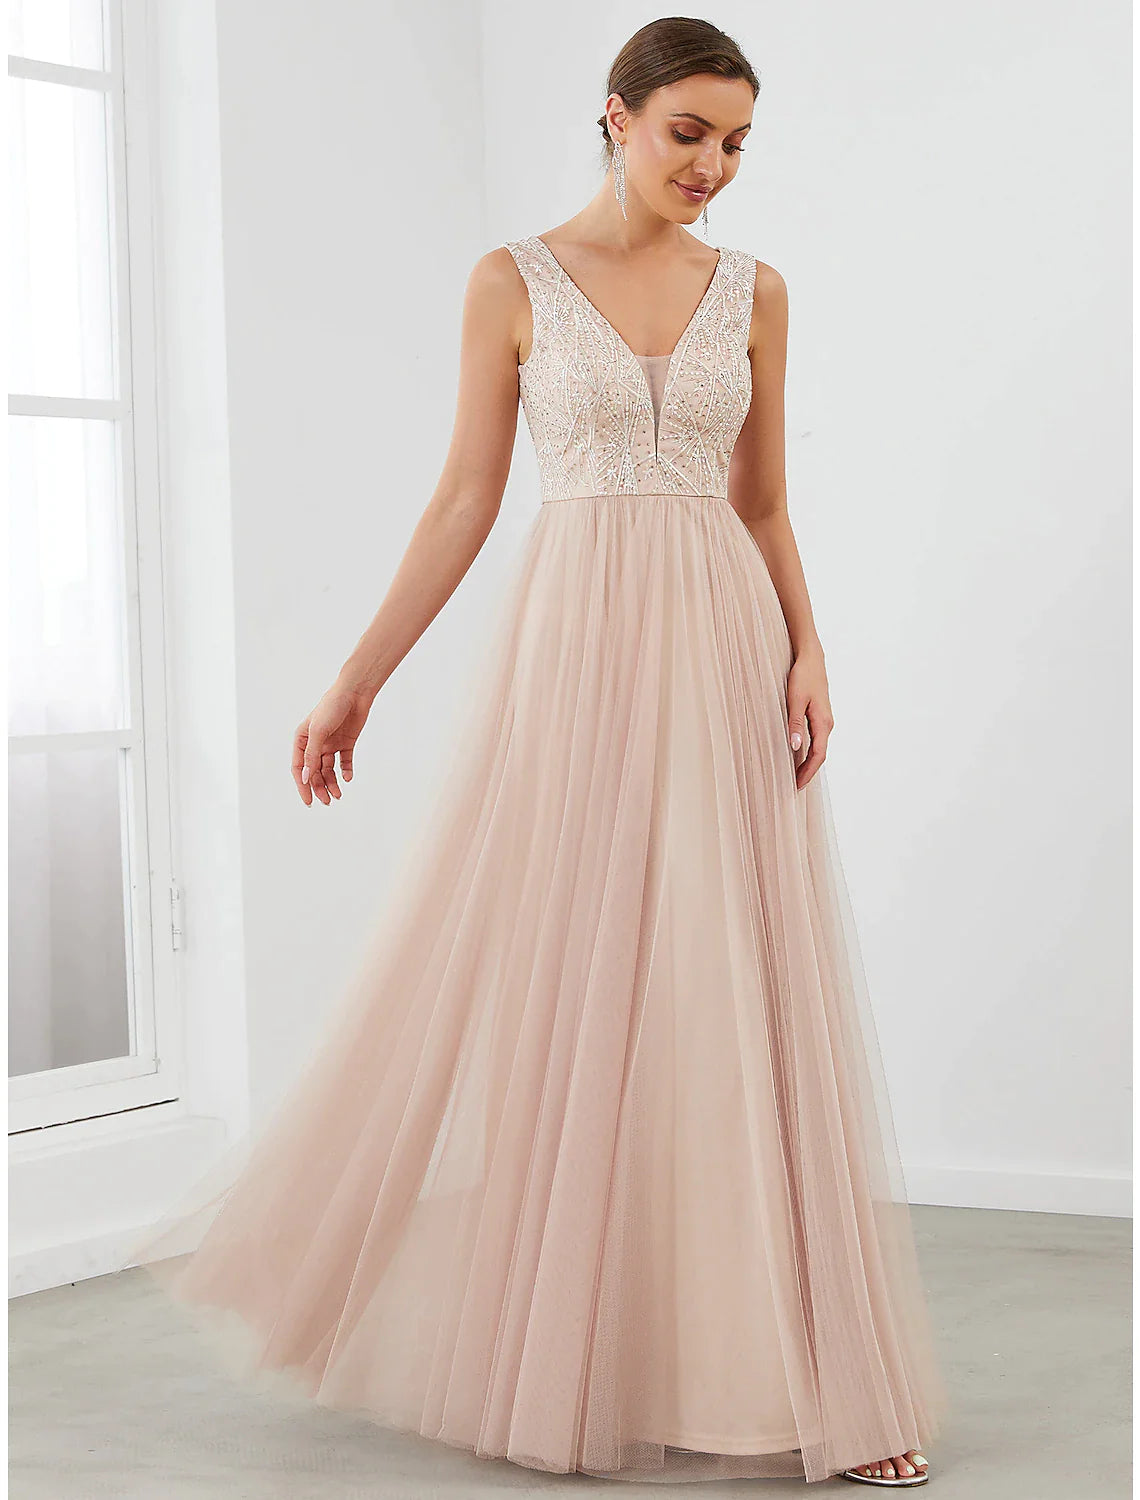 A-Line Evening Gown Elegant Dress Wedding Guest Floor Length Sleeveless V Neck Tulle V Back with Sequin Draping